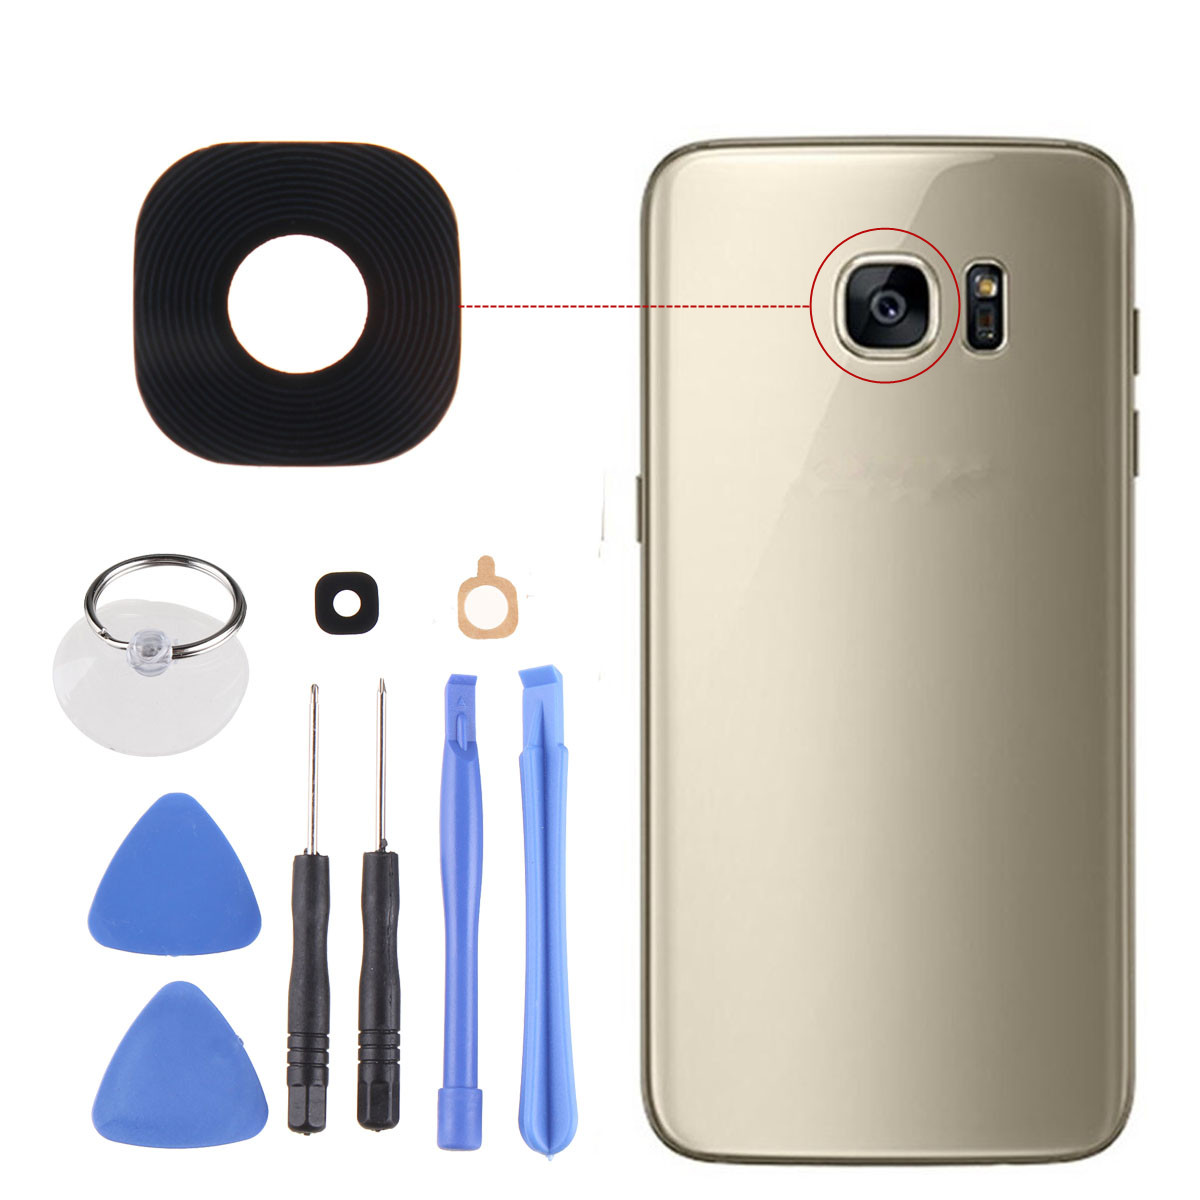 

Black Rear Camera Glass Adhesive Lens Cover + Tools for Samsung Galaxy S7 Edge